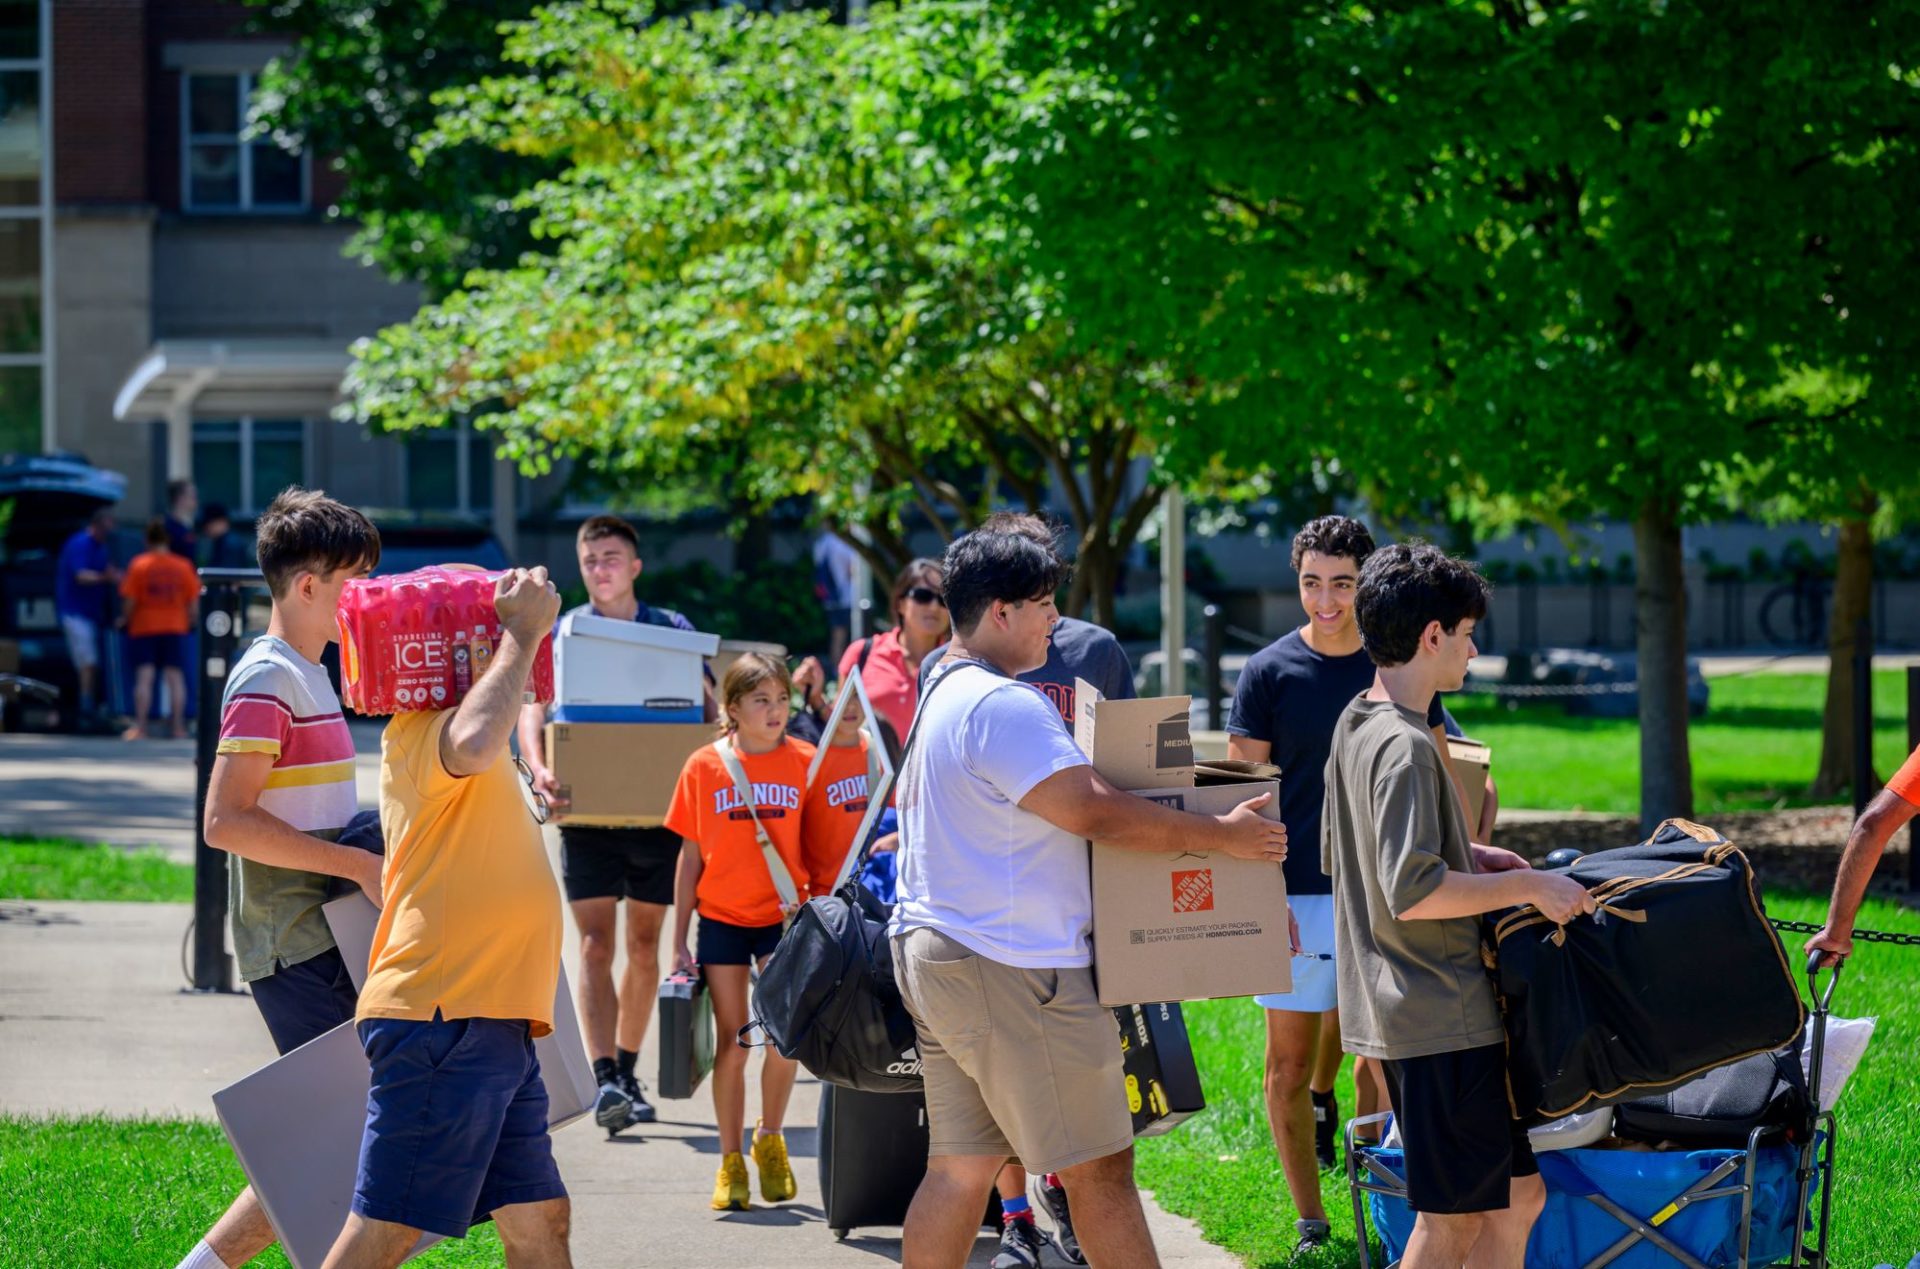 Students are carrying boxes and other items down a sidewalk on move in day at University of Illinois.